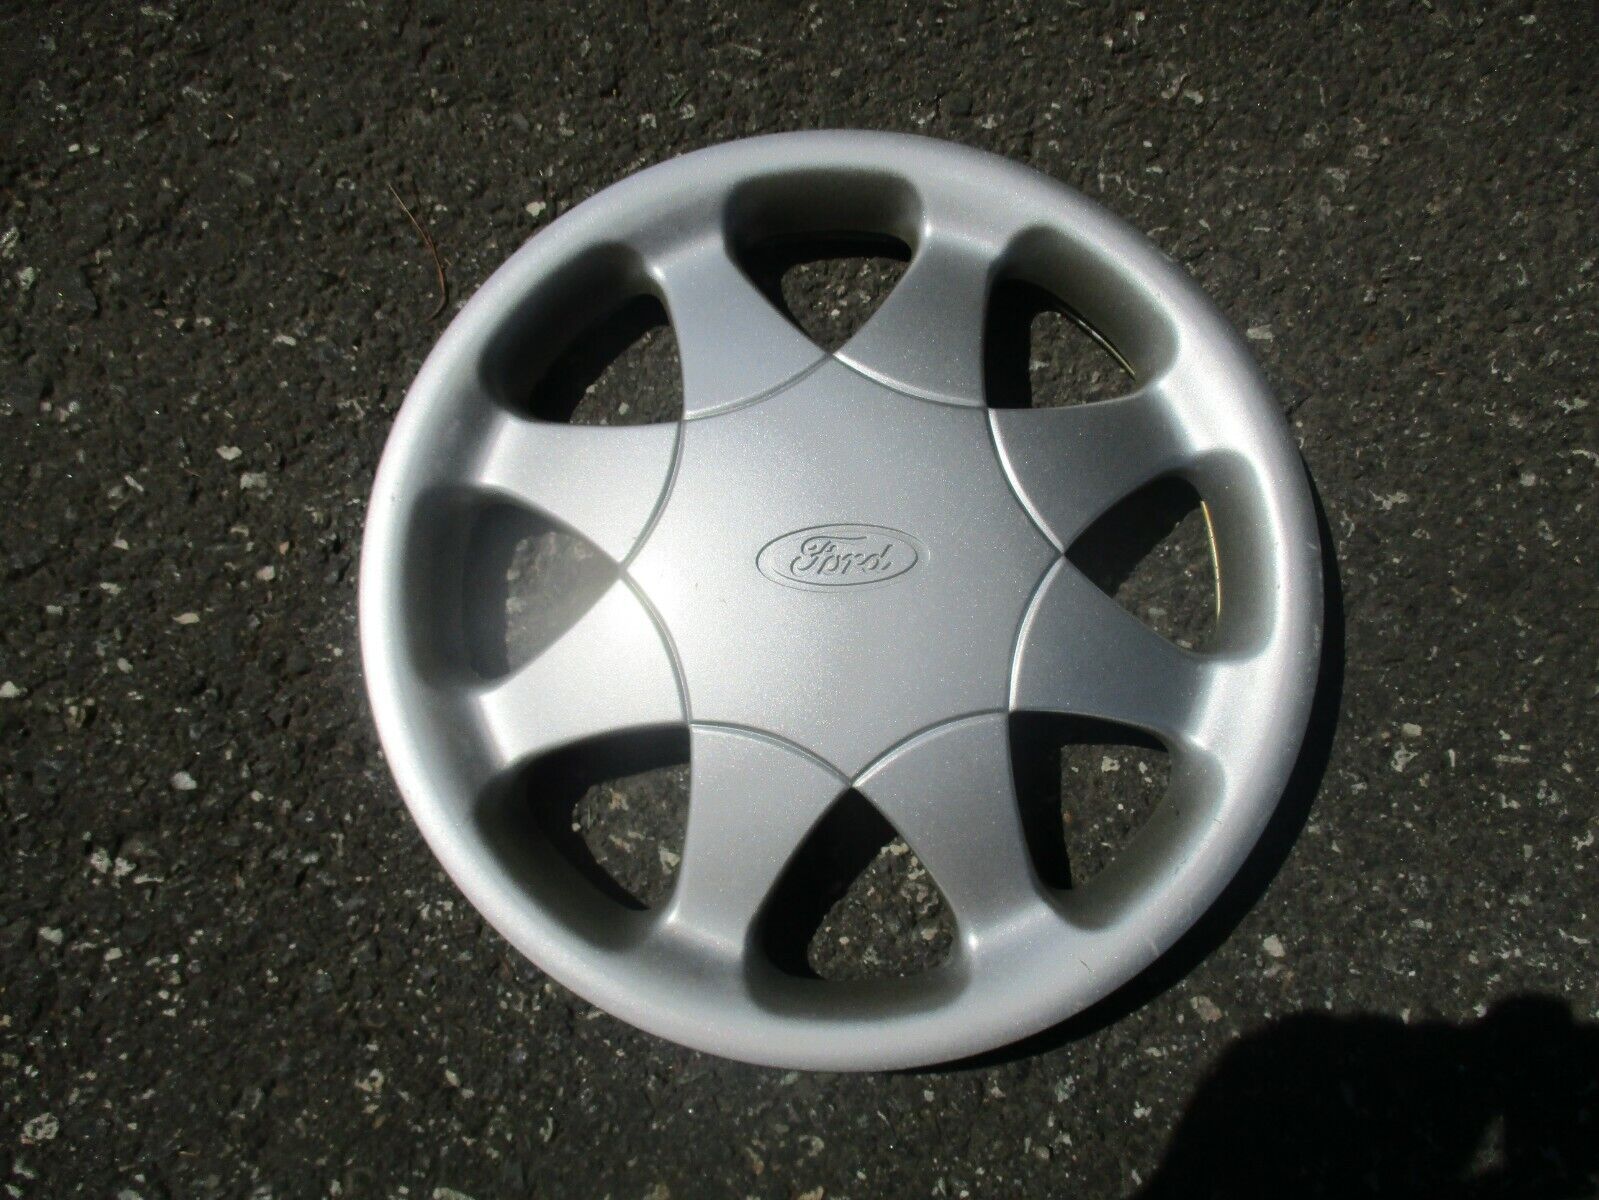 One factory 1997 Ford Aspire13 inch hubcap wheel cover